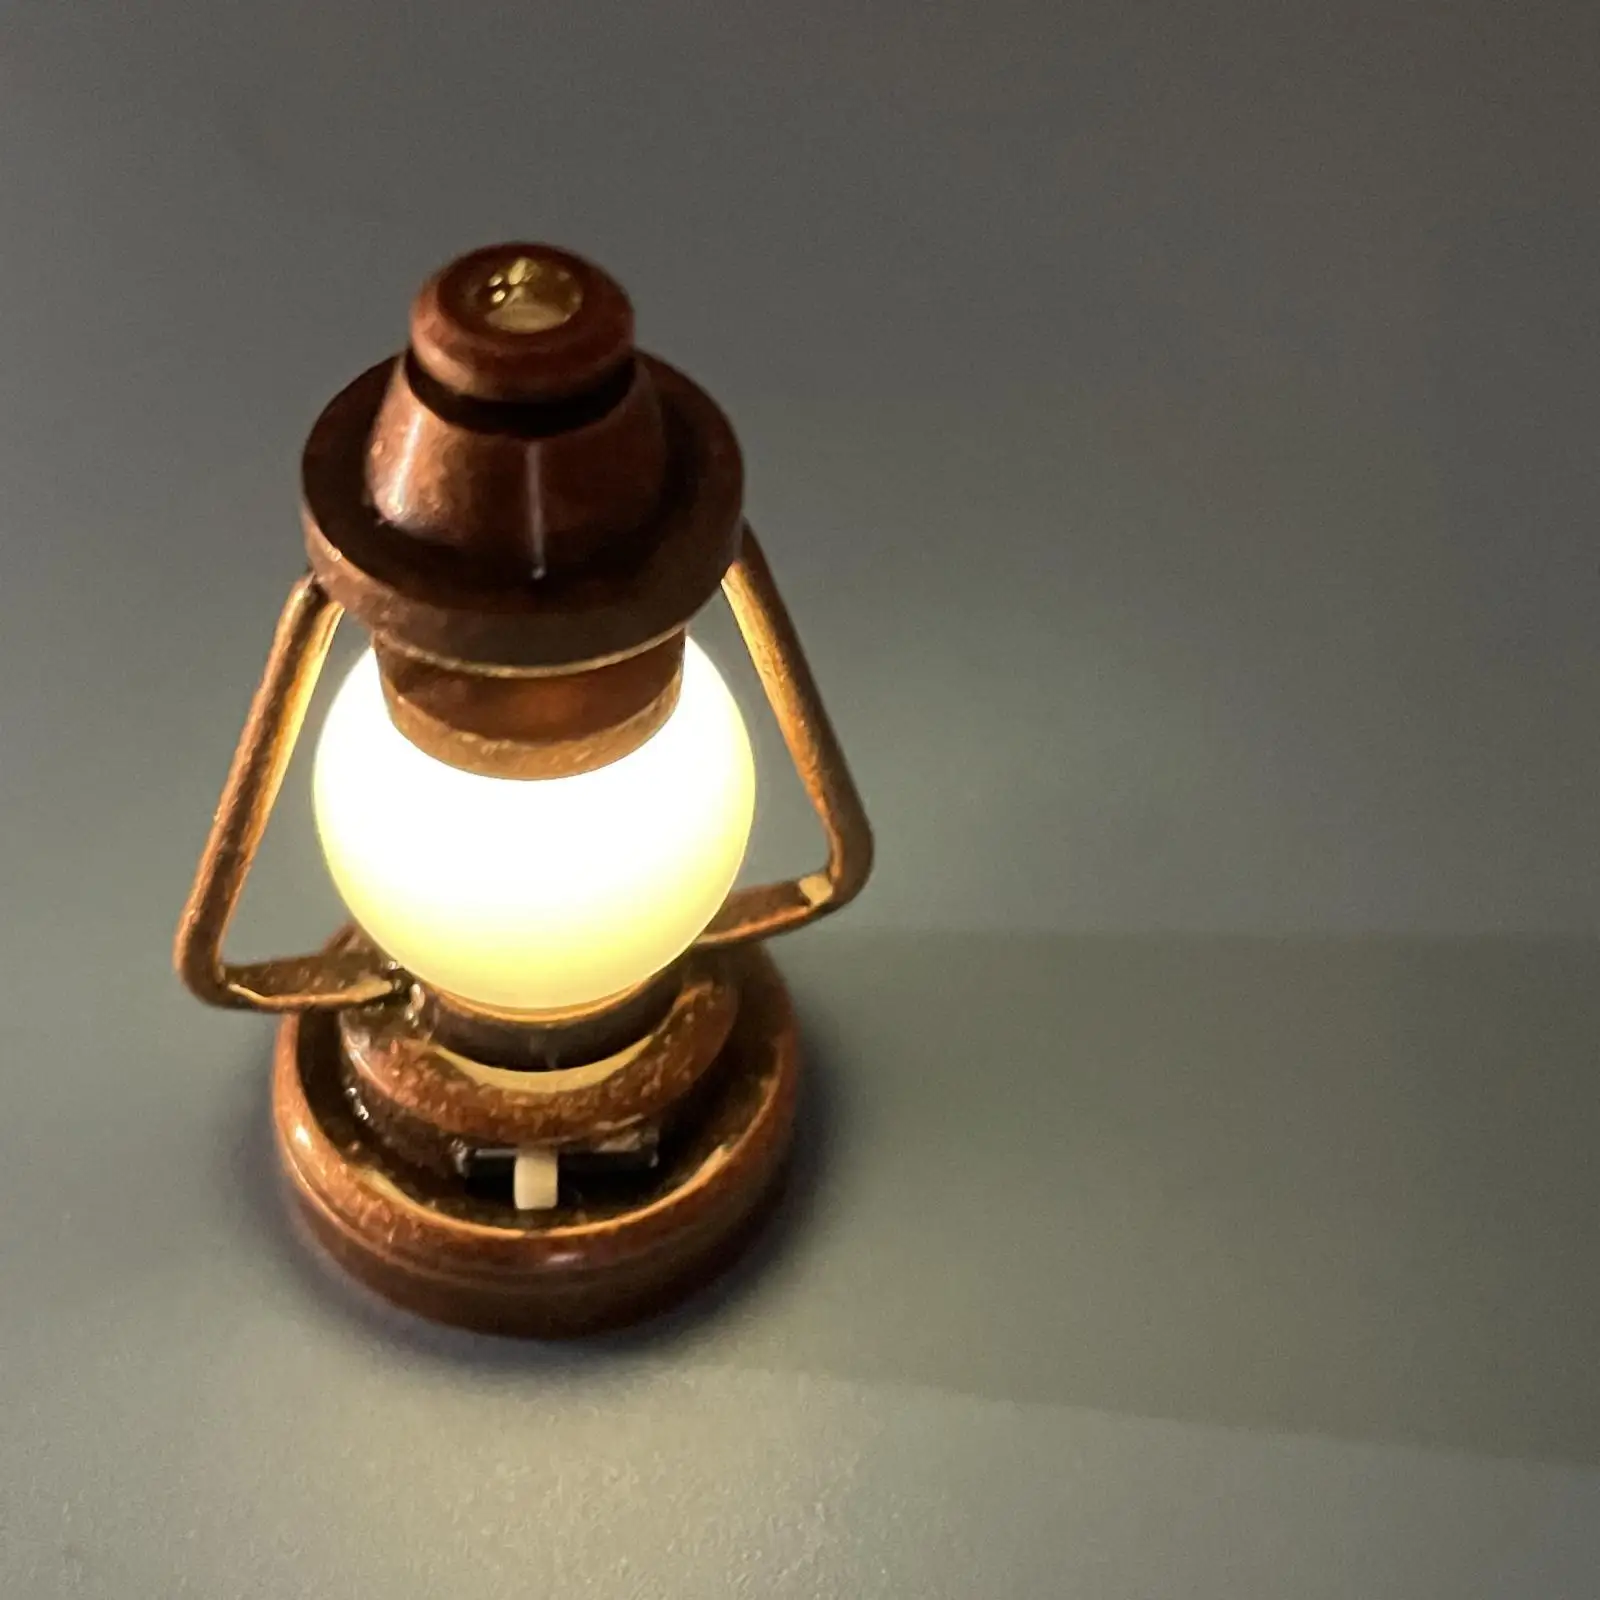 1:12 Dollhouse Lantern Battery Operated Lamp Light LED Miniature Retro Dollhouse Accessories Doll House Decoration Toy Model